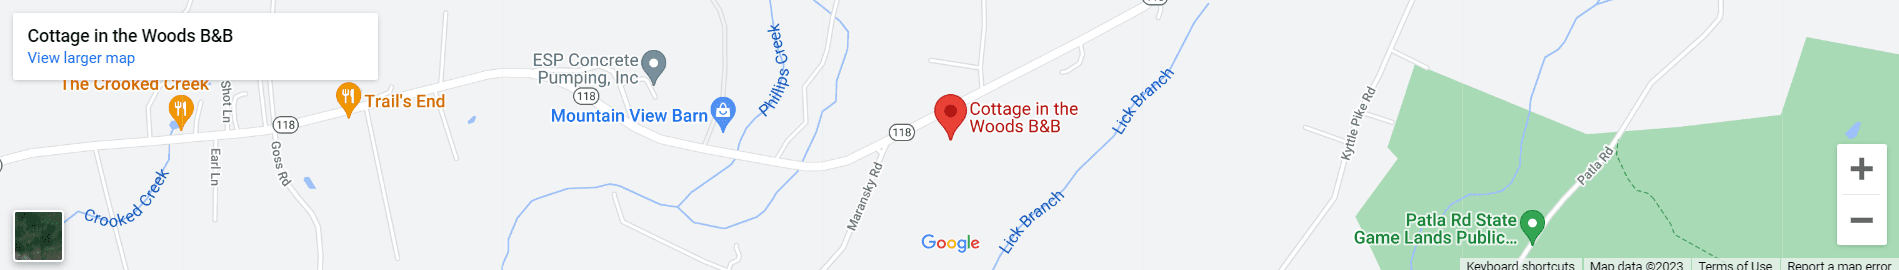 The Cottage in the Woods